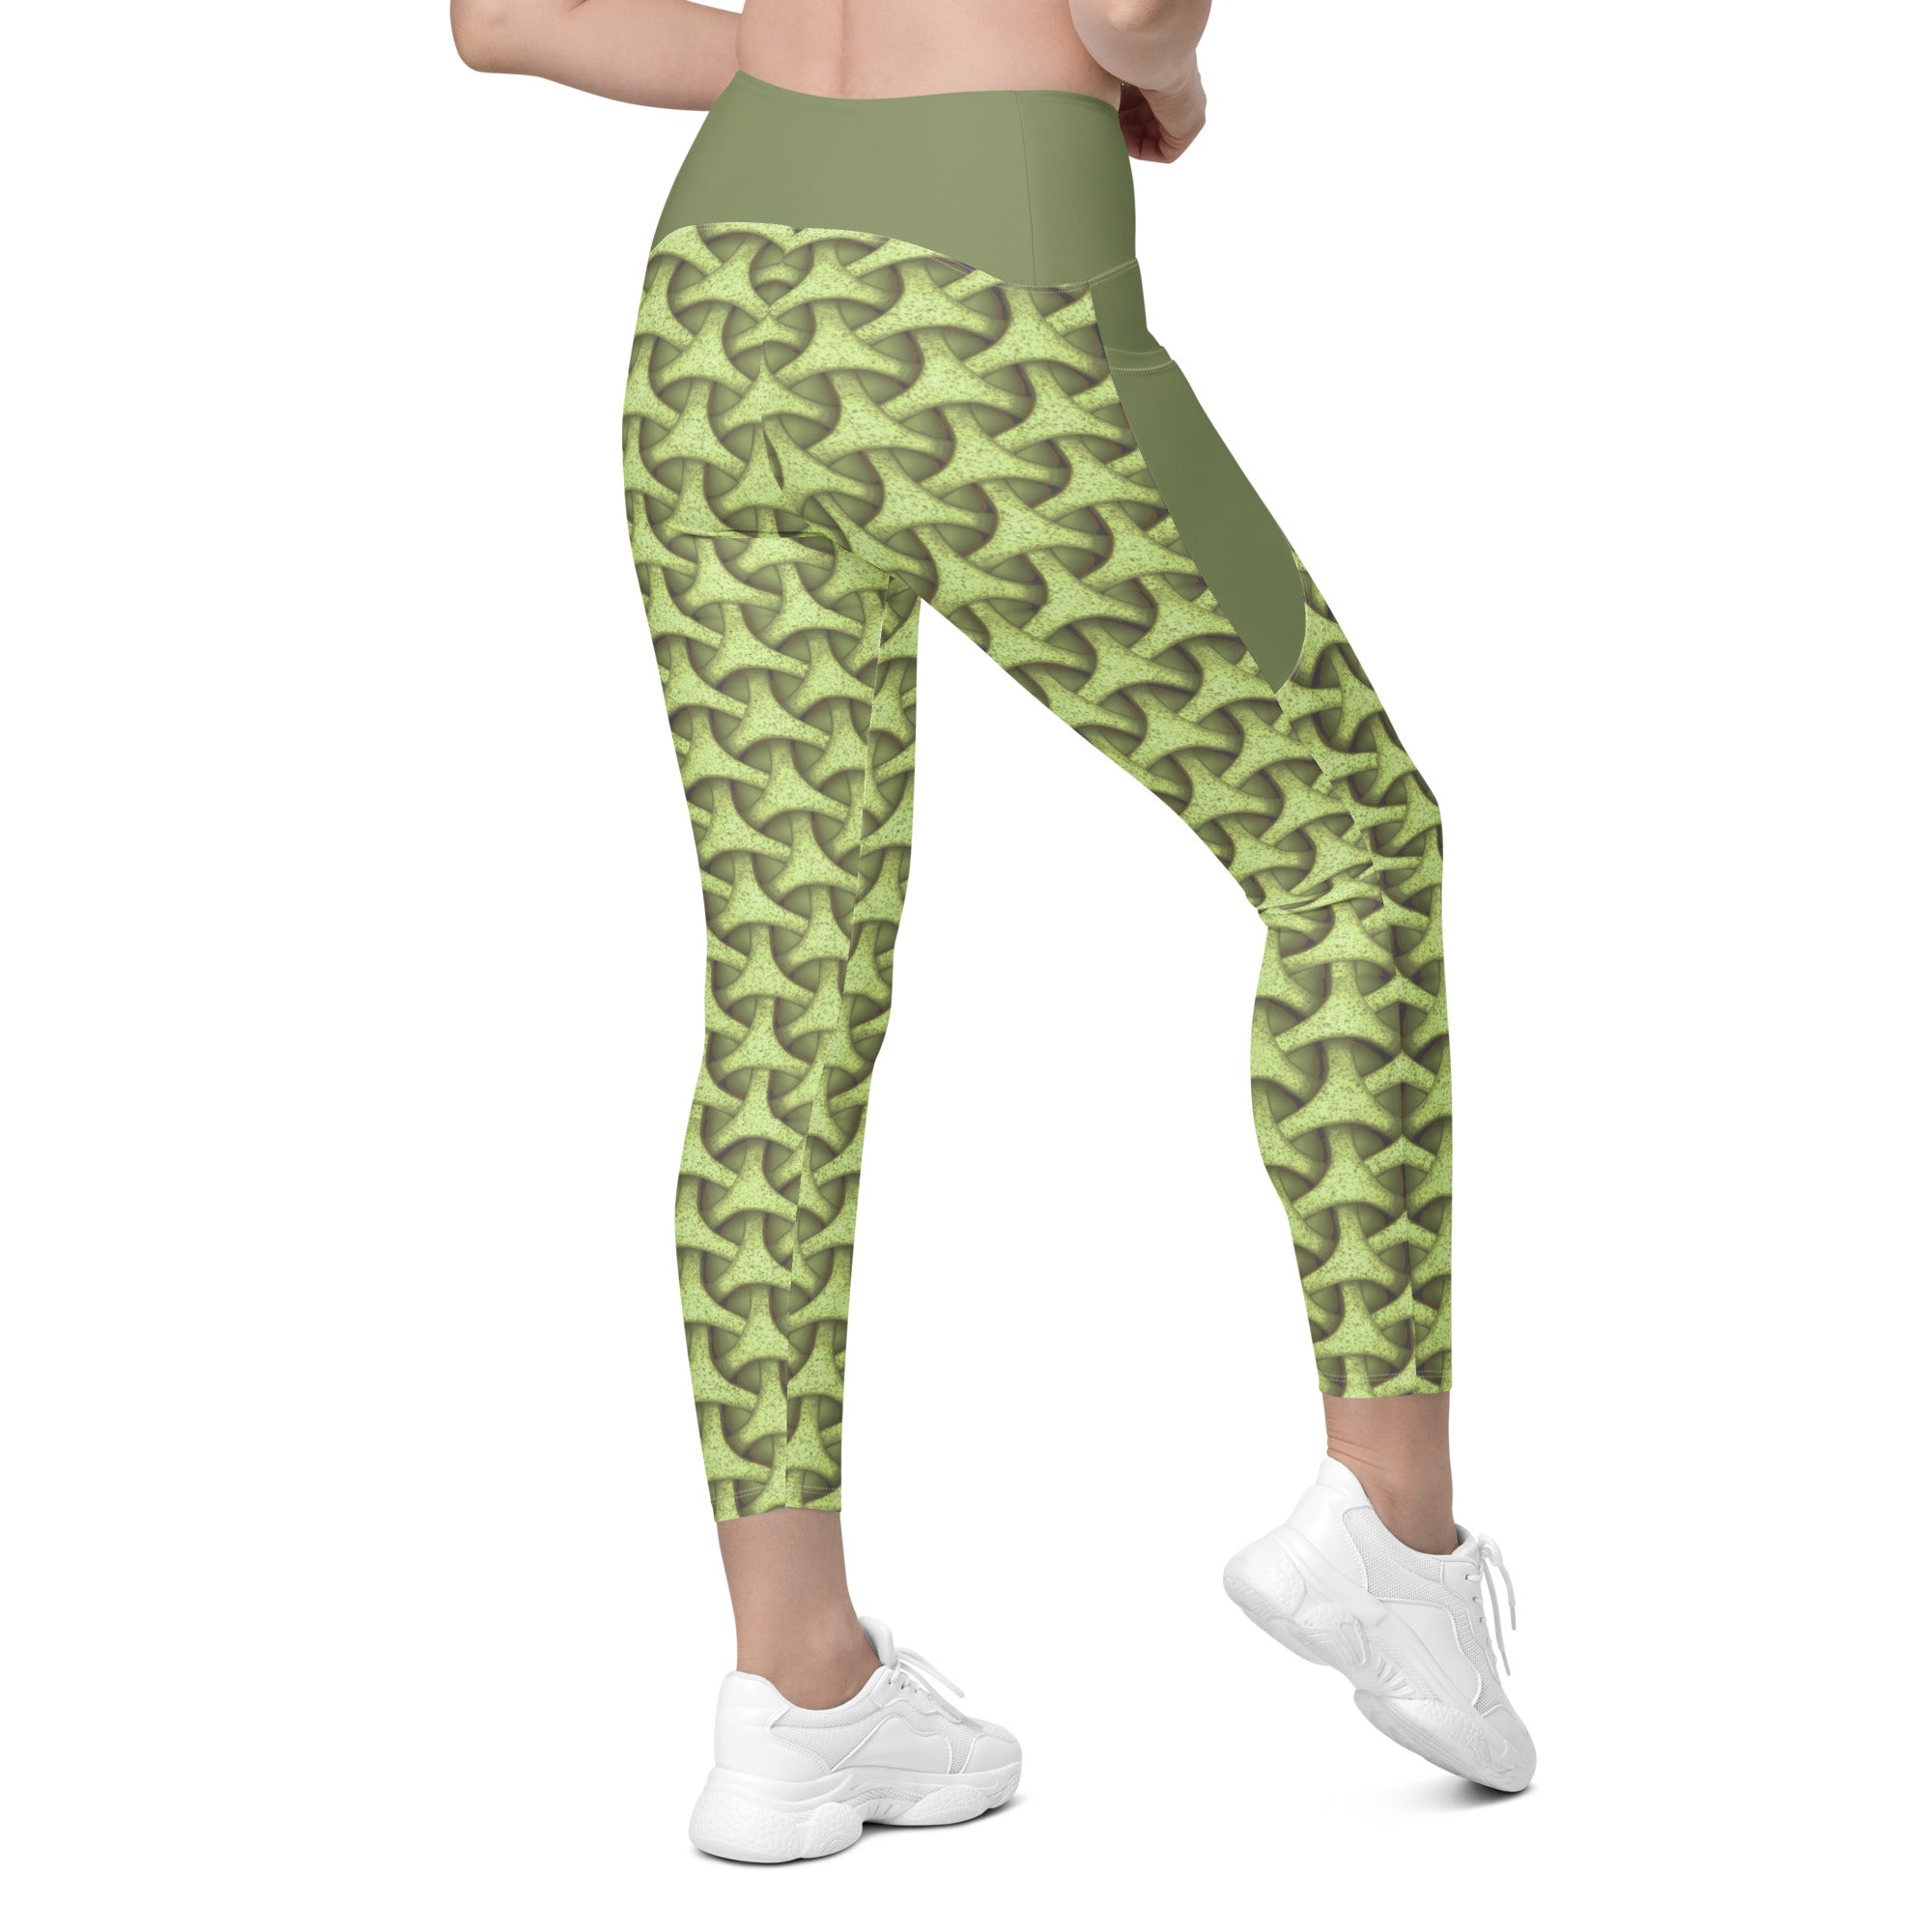 Zenith Zen Tristar Leggings equipped with pockets, ideal for storing small items.